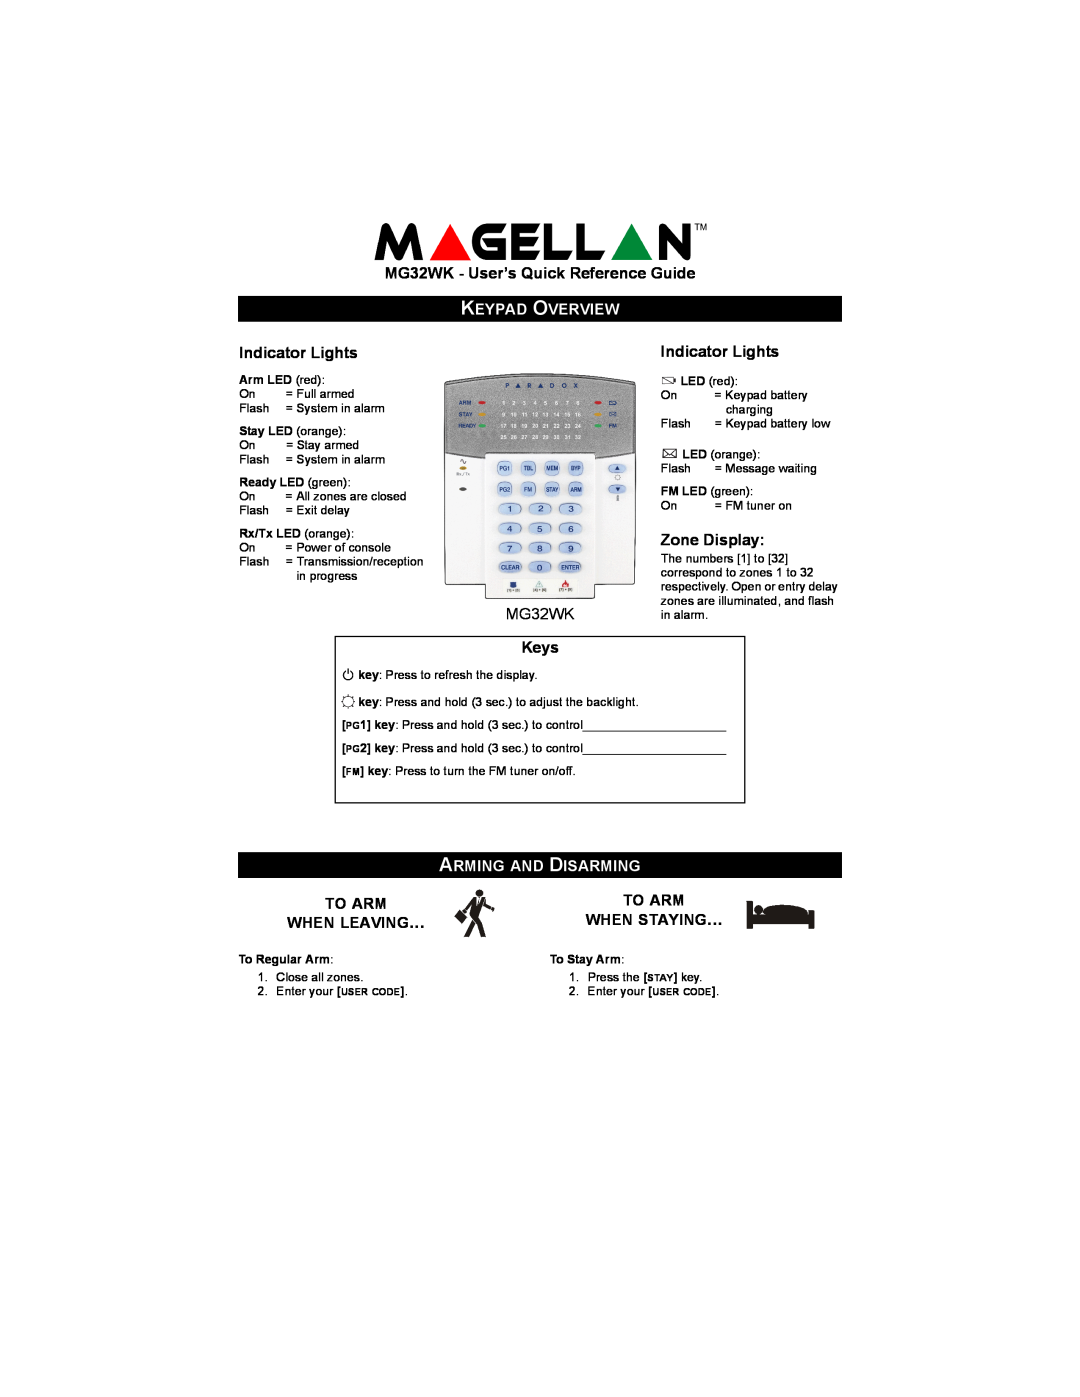 Magellan manual Keypad Overview, Arming And Disarming, MG32WK - User’s Quick Reference Guide, Indicator Lights, Keys 